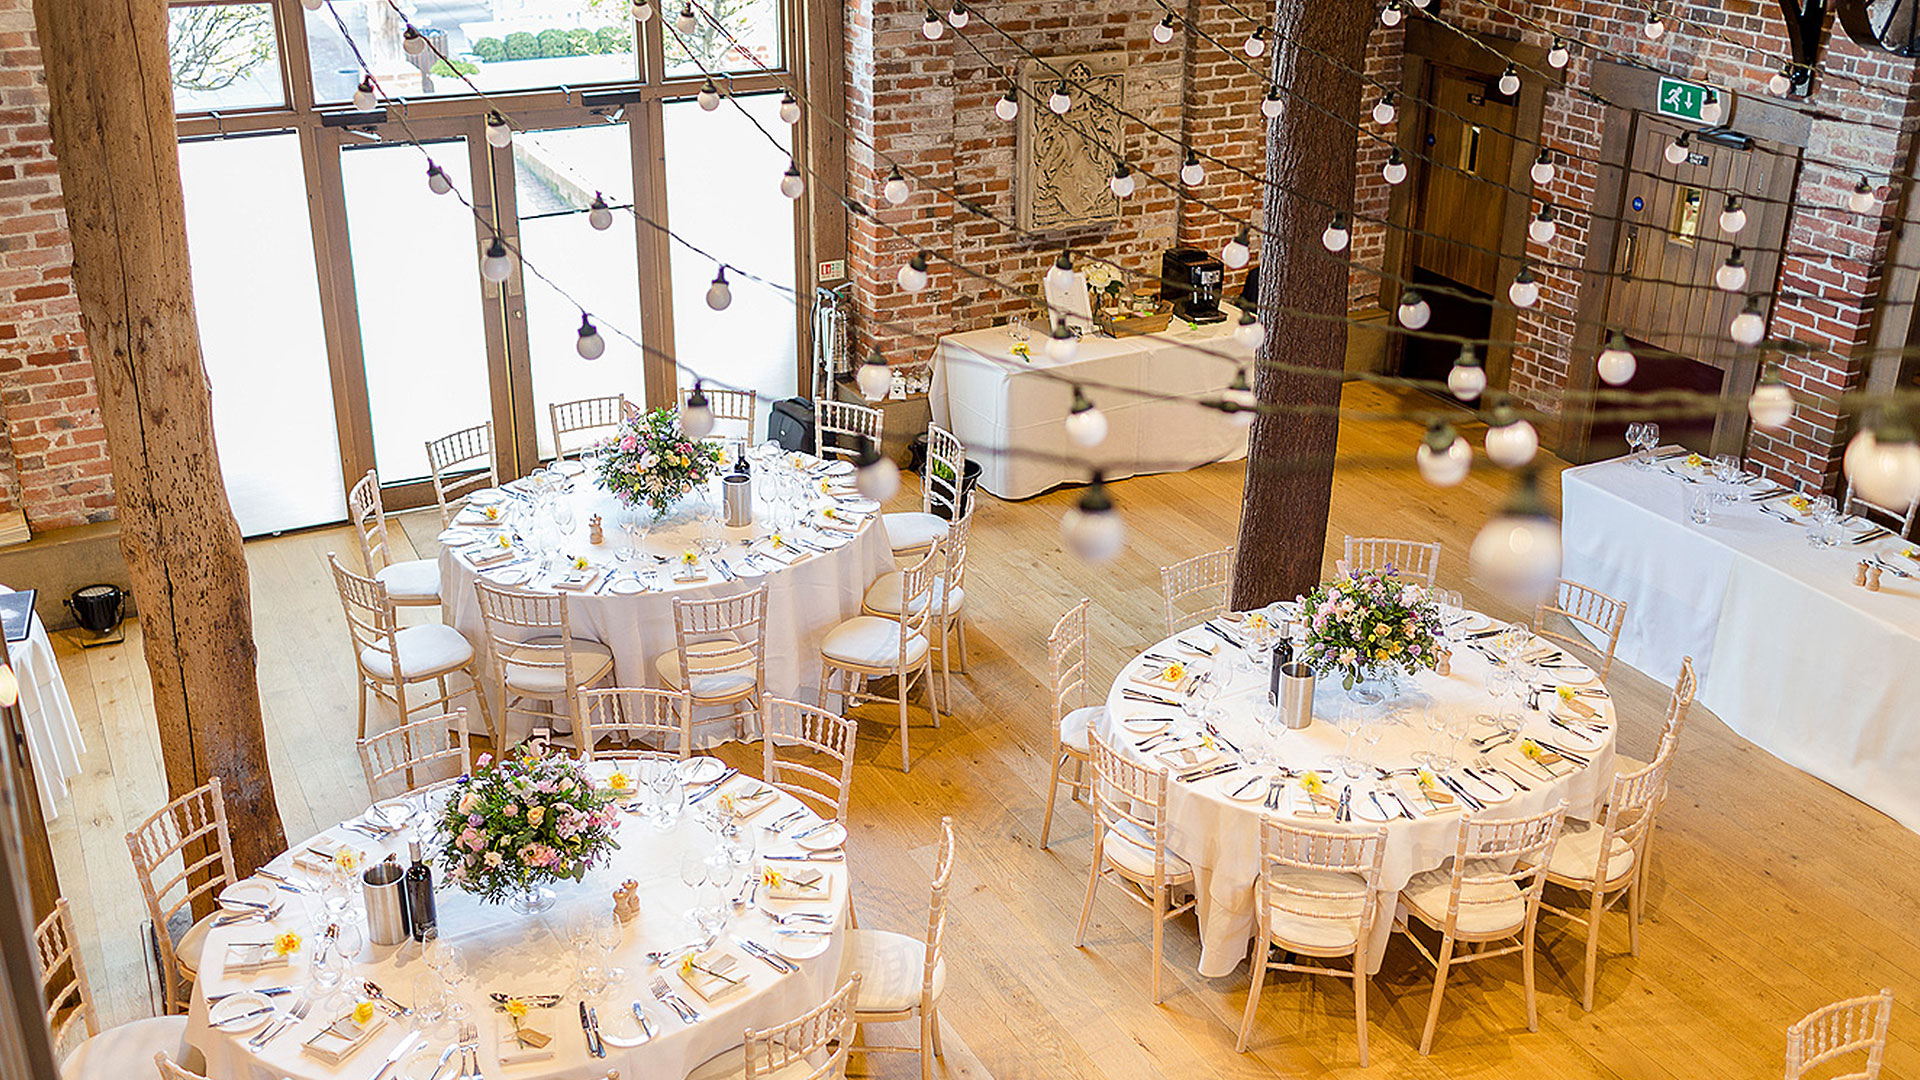 The Mill Barn is set up for a wedding with beautiful yellow and pink flowers for the table centrepieces